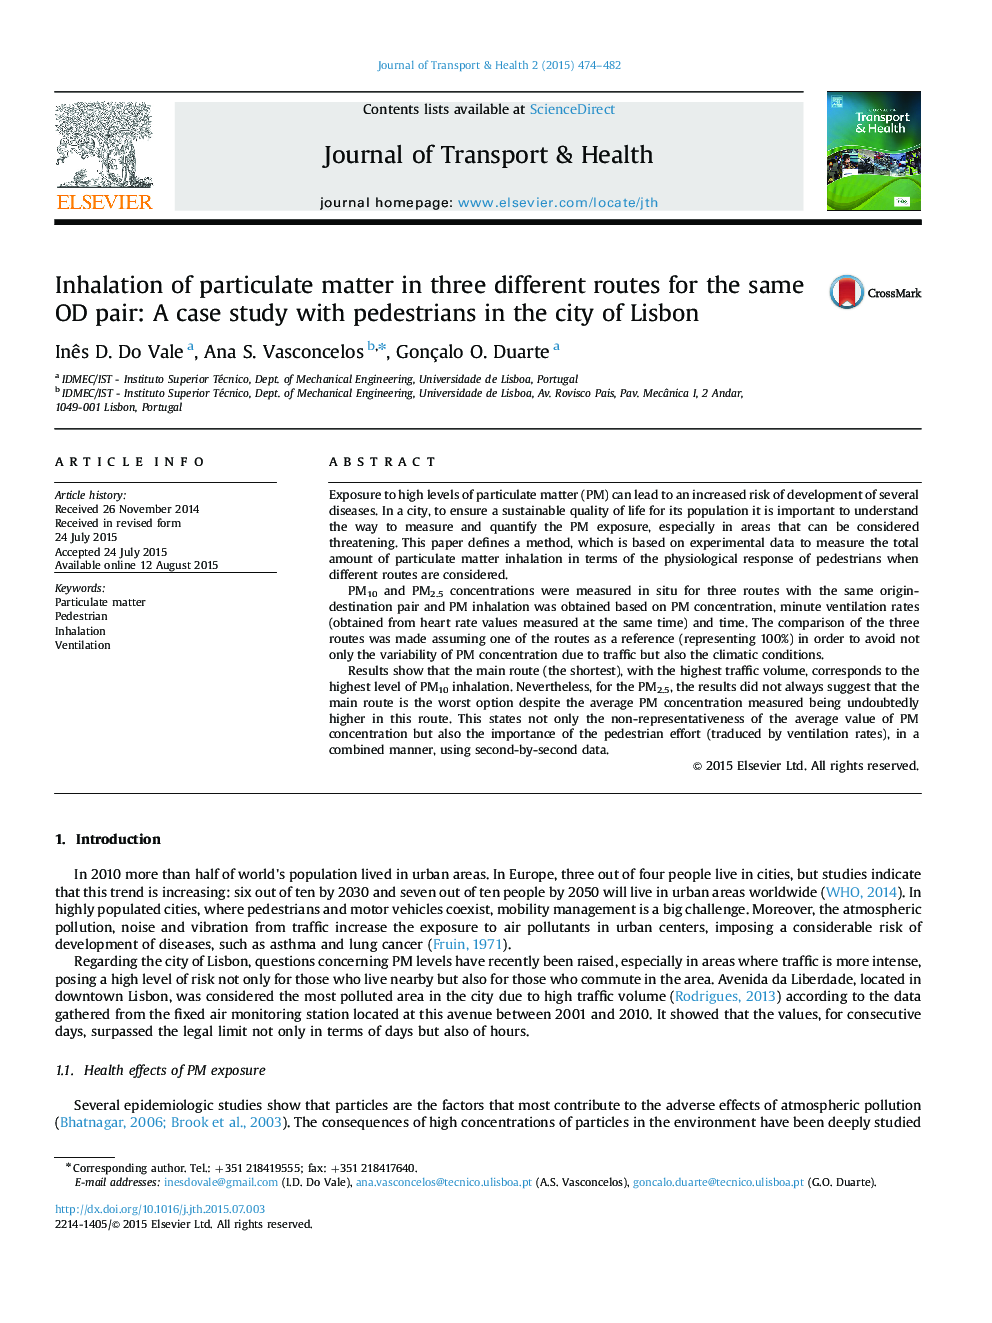 Inhalation of particulate matter in three different routes for the same OD pair: A case study with pedestrians in the city of Lisbon